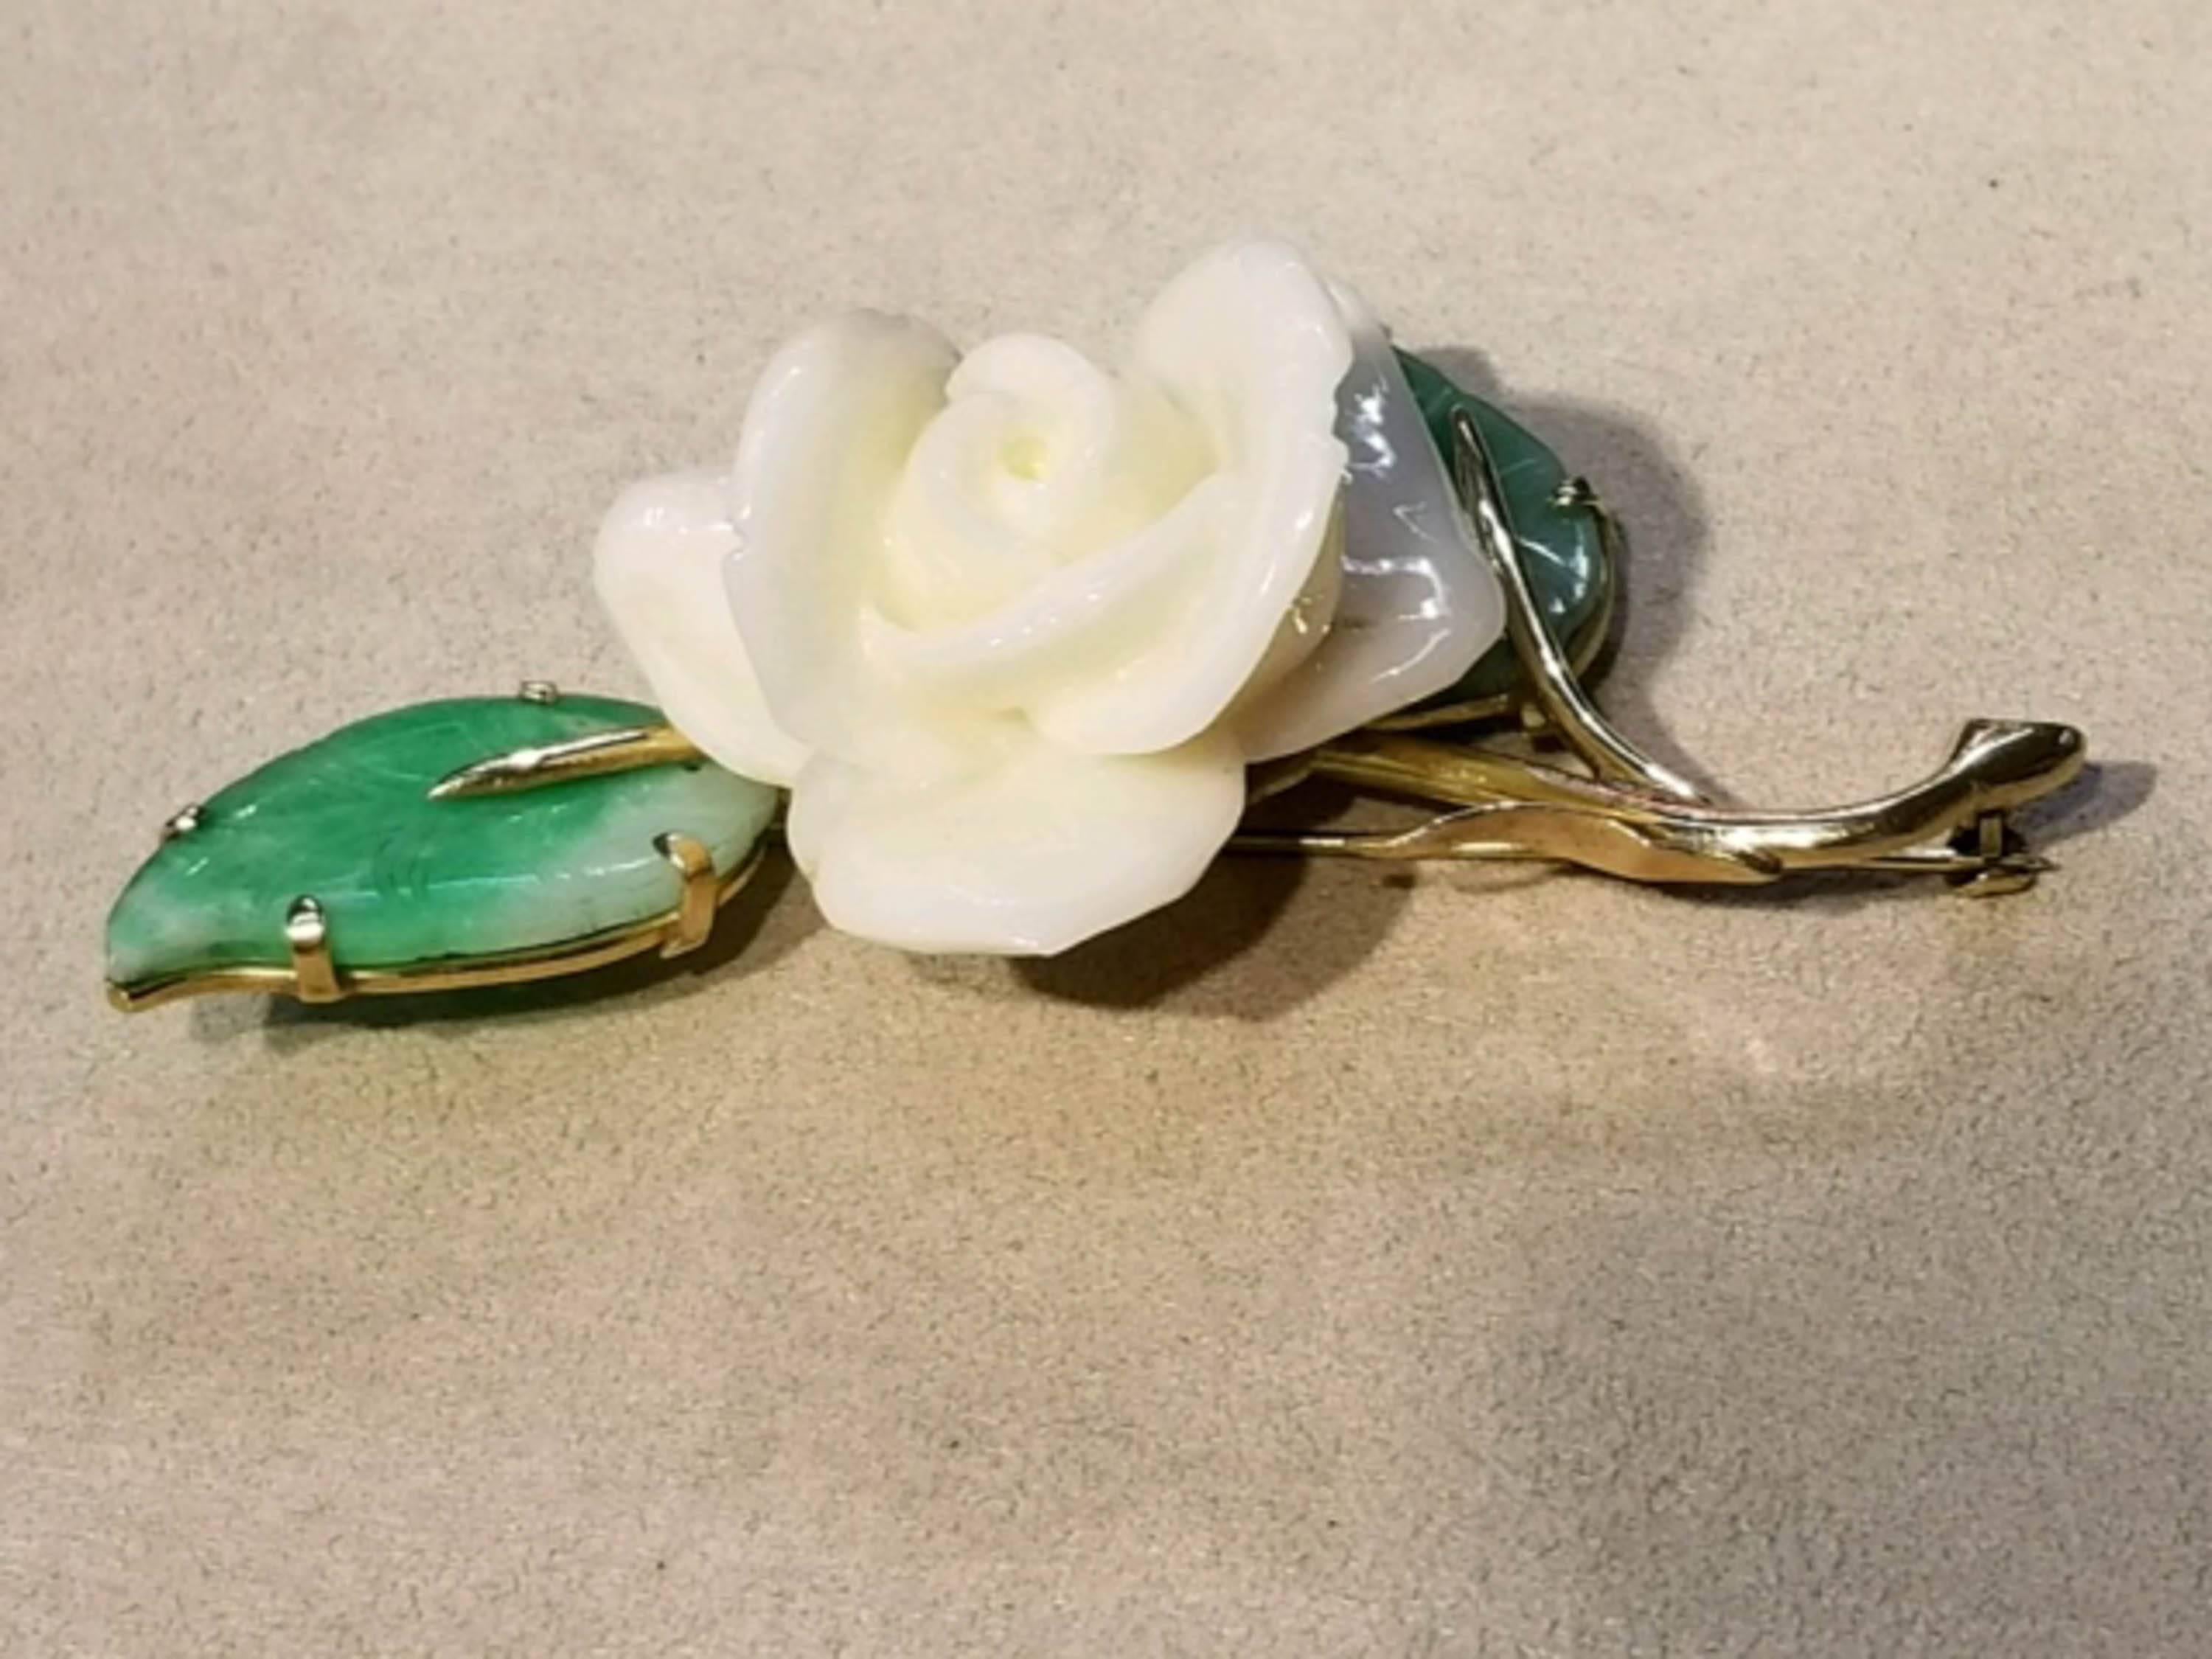 Gump's, 14kt y/g, White Coral and Jade Brooch.

Dimensions: 2 3/4